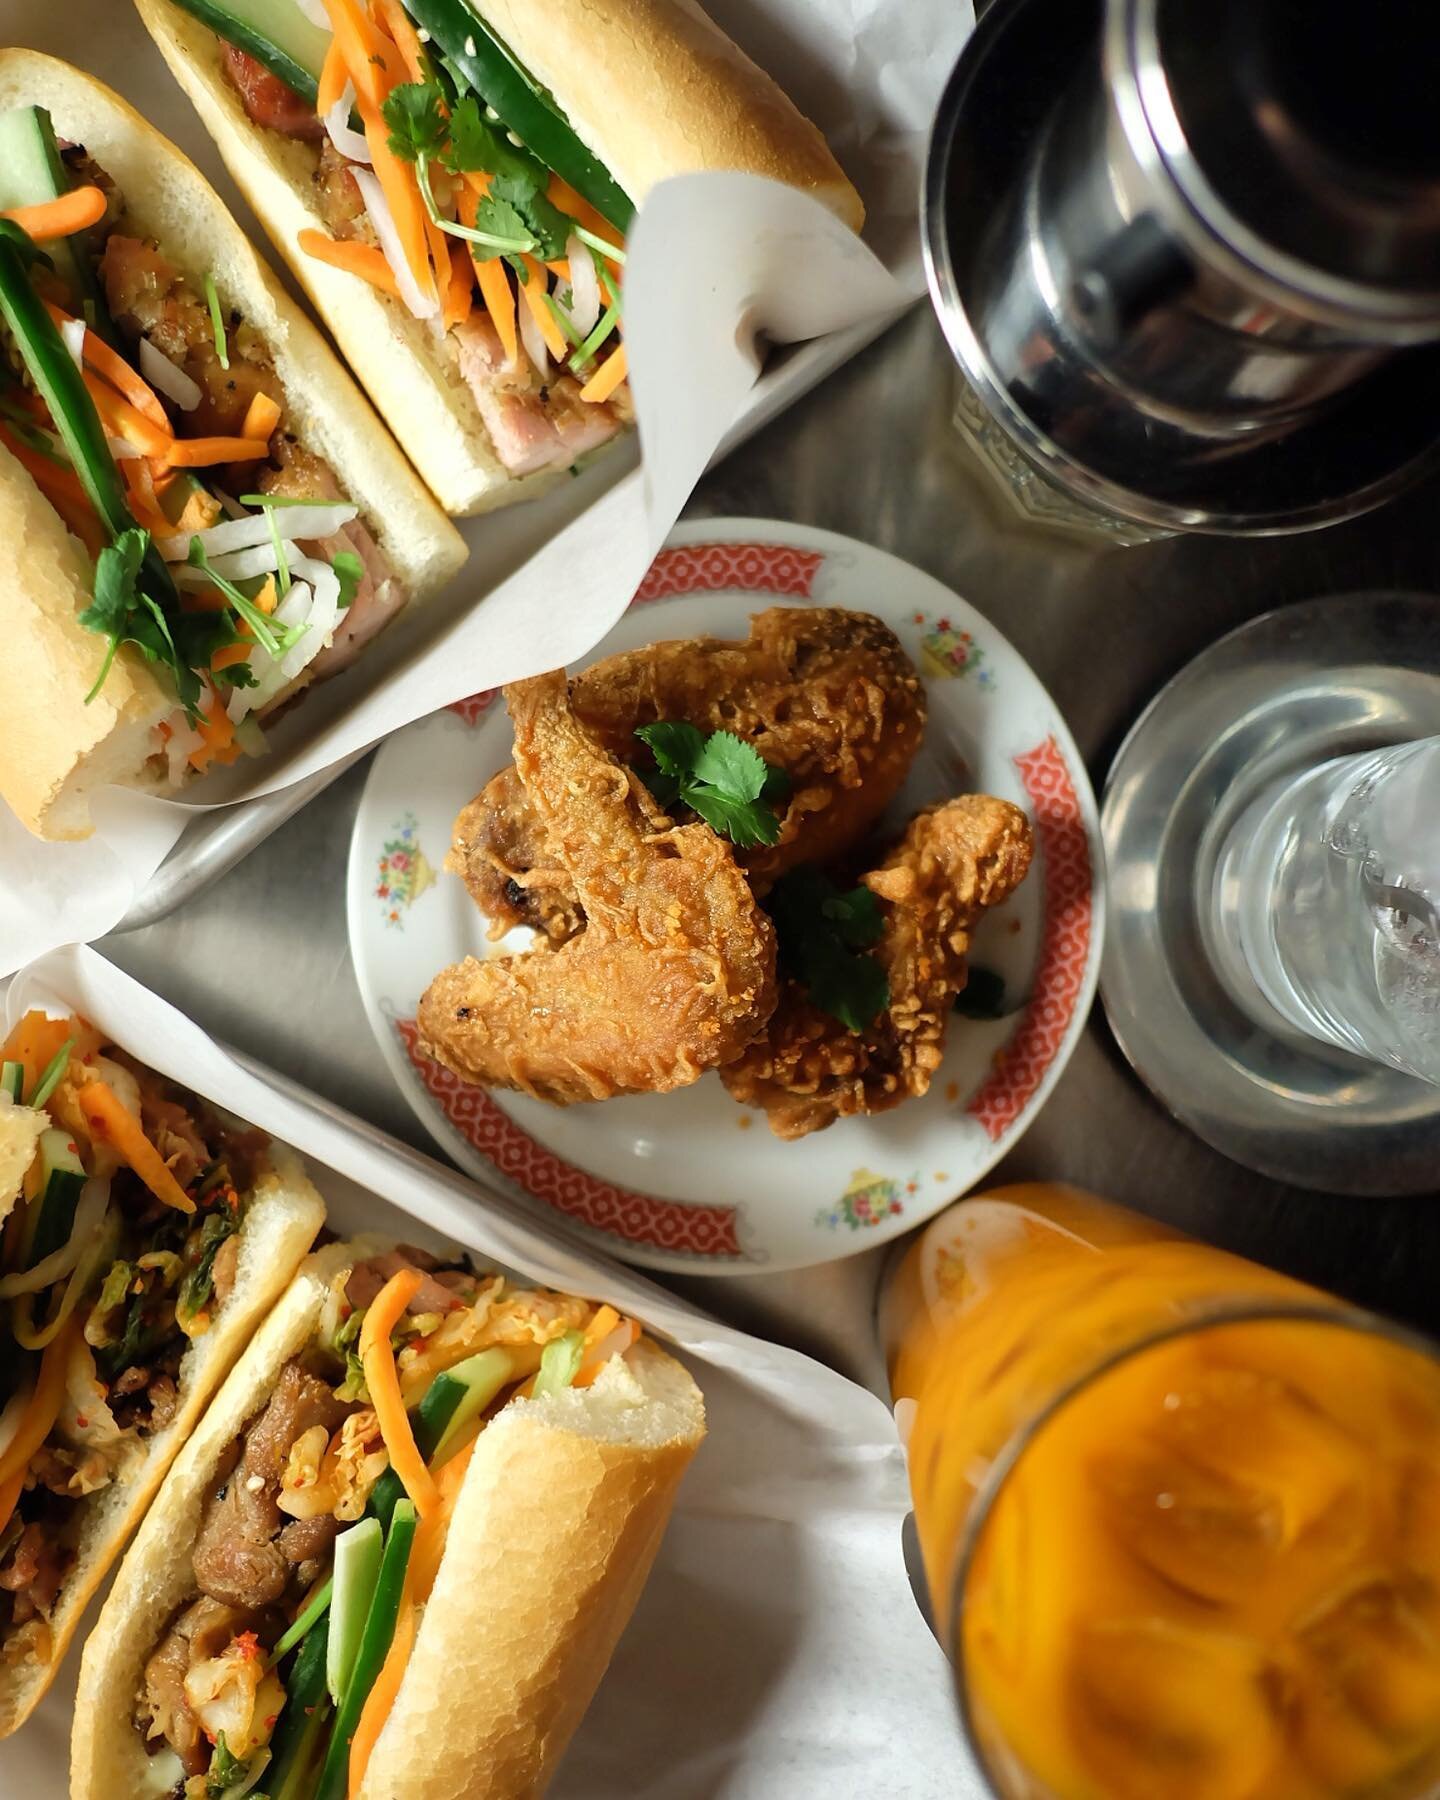 DINE-OUT FOR 2! LUNCH FOR 2! Celebrating dine out this year with a little help from our Chinatown location. 

We brought our popular fish sauce glazed chicken wings into the mix! 2 banh mi&rsquo;s, chicken wings and your choice of 2 Thai teas of Iced